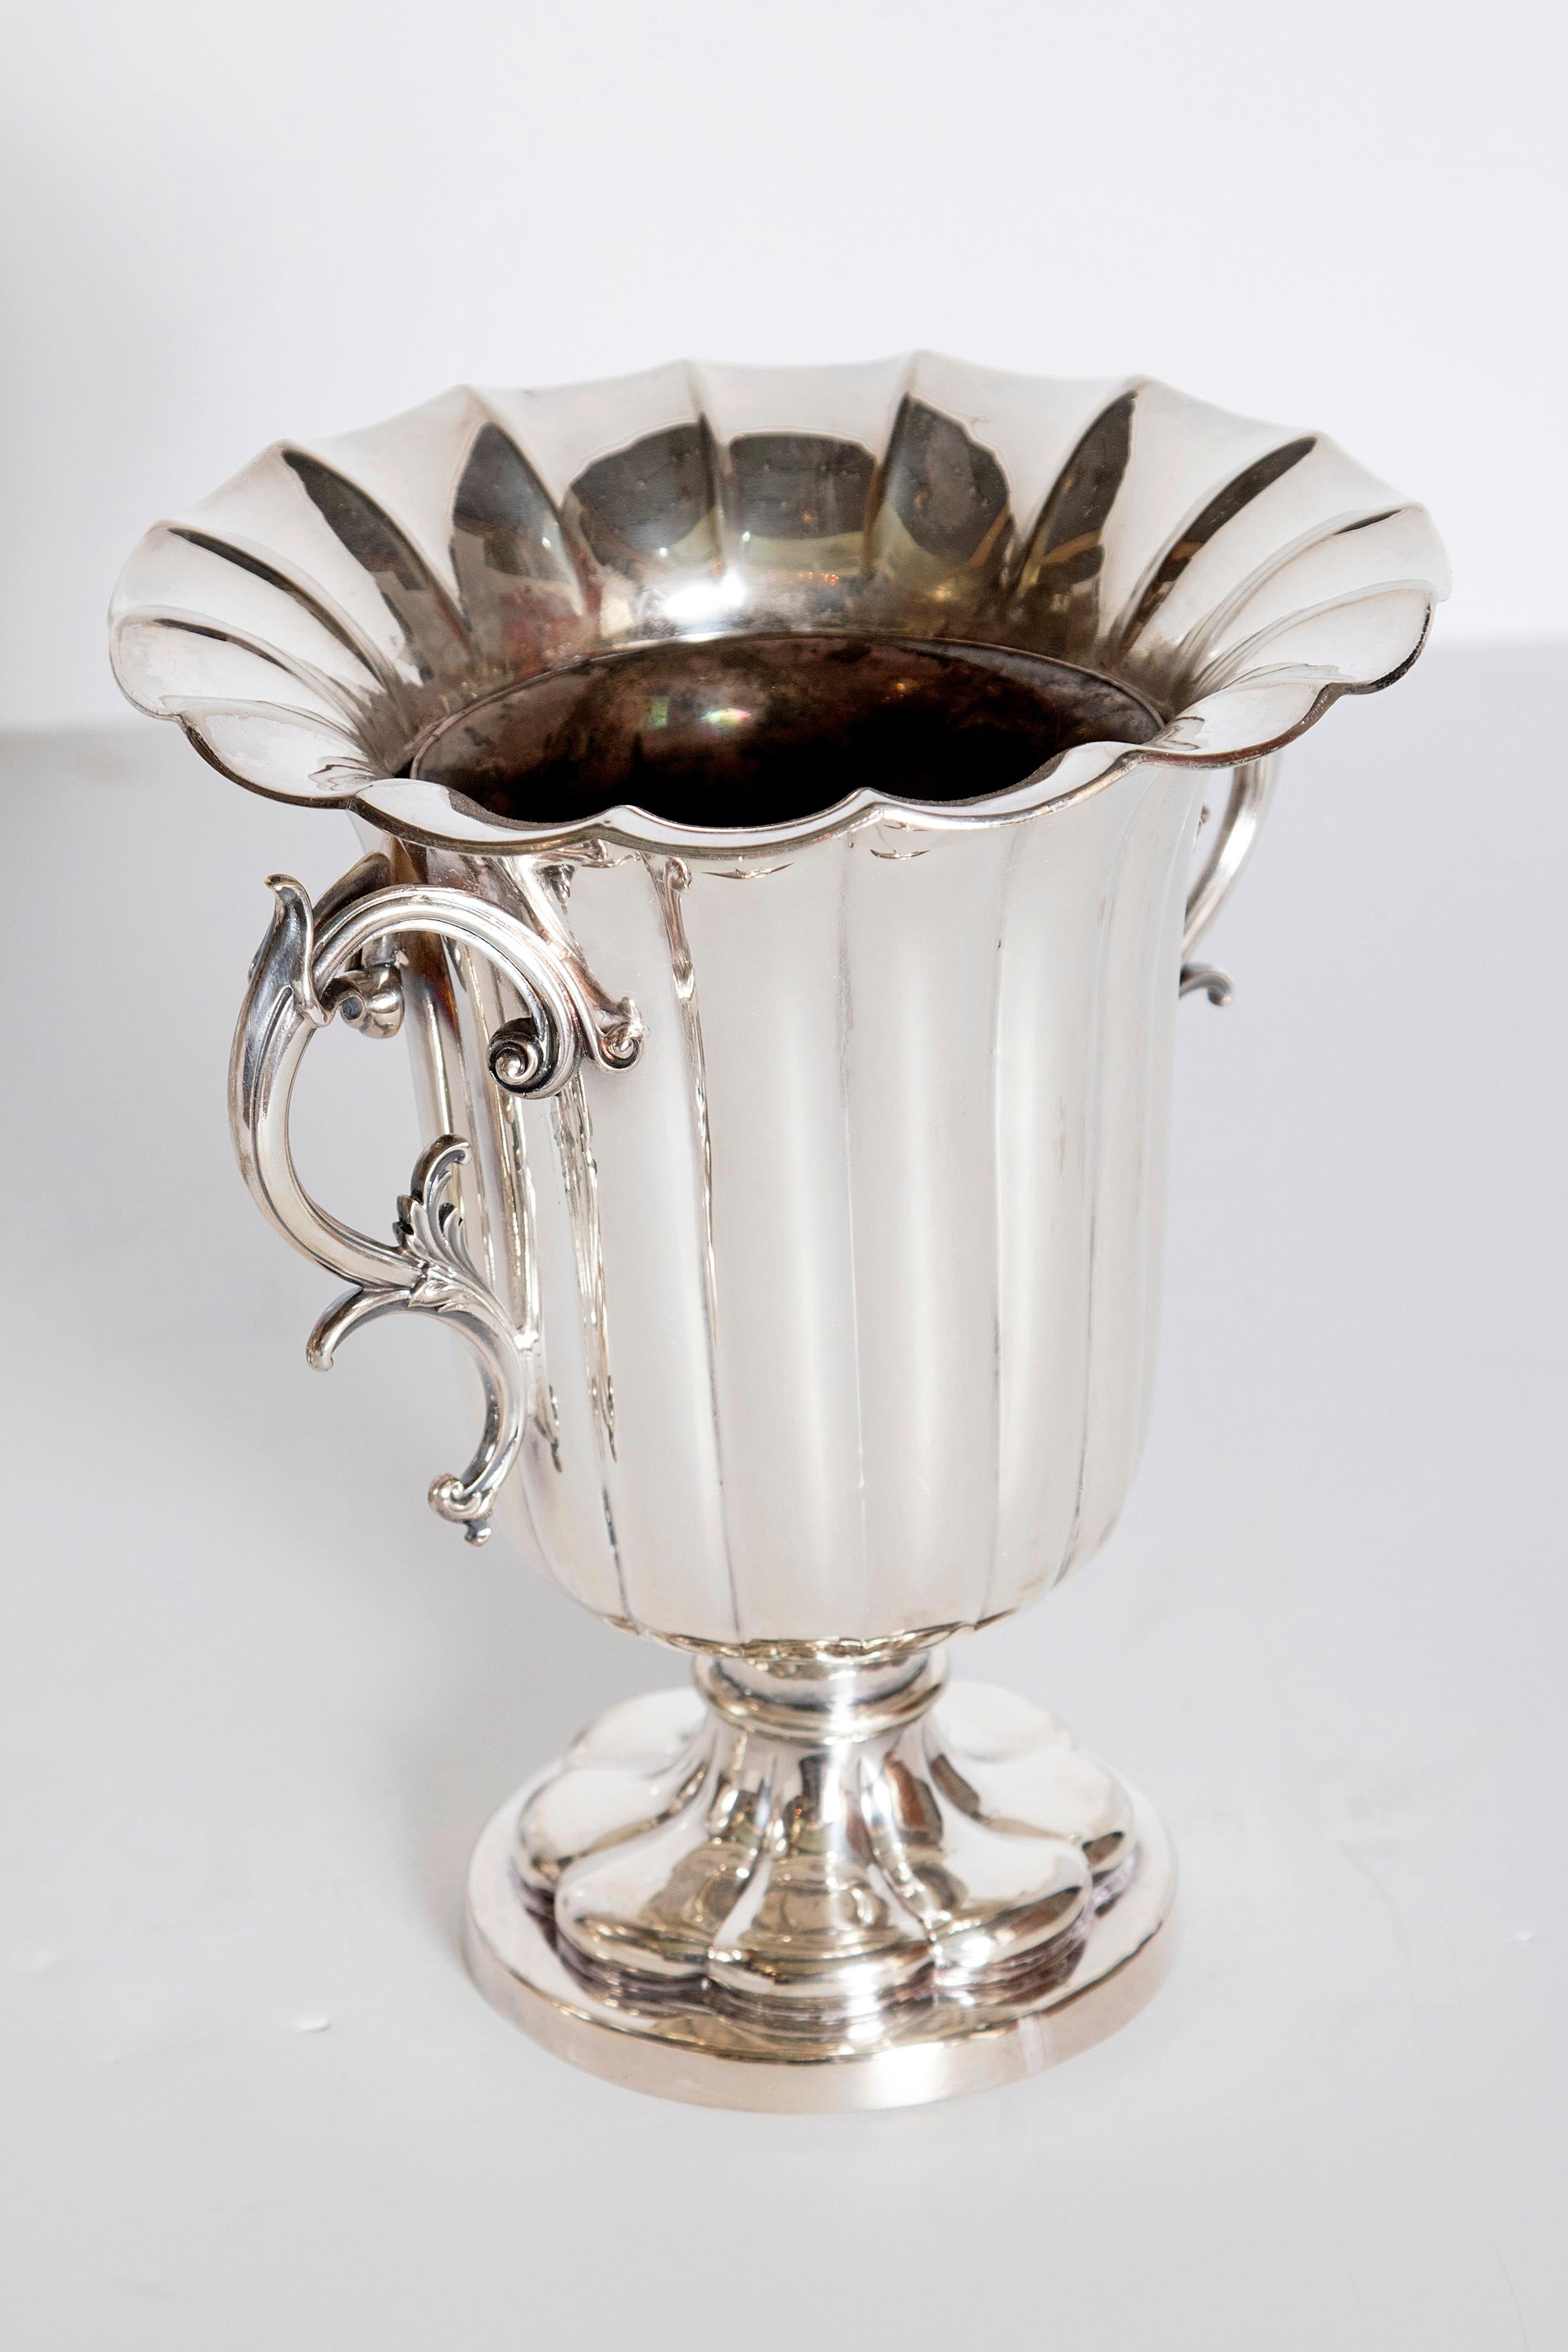 Hand-Crafted Mid-19th Century Pair of Silver Plate Ice Vases by Elkington & Co., England